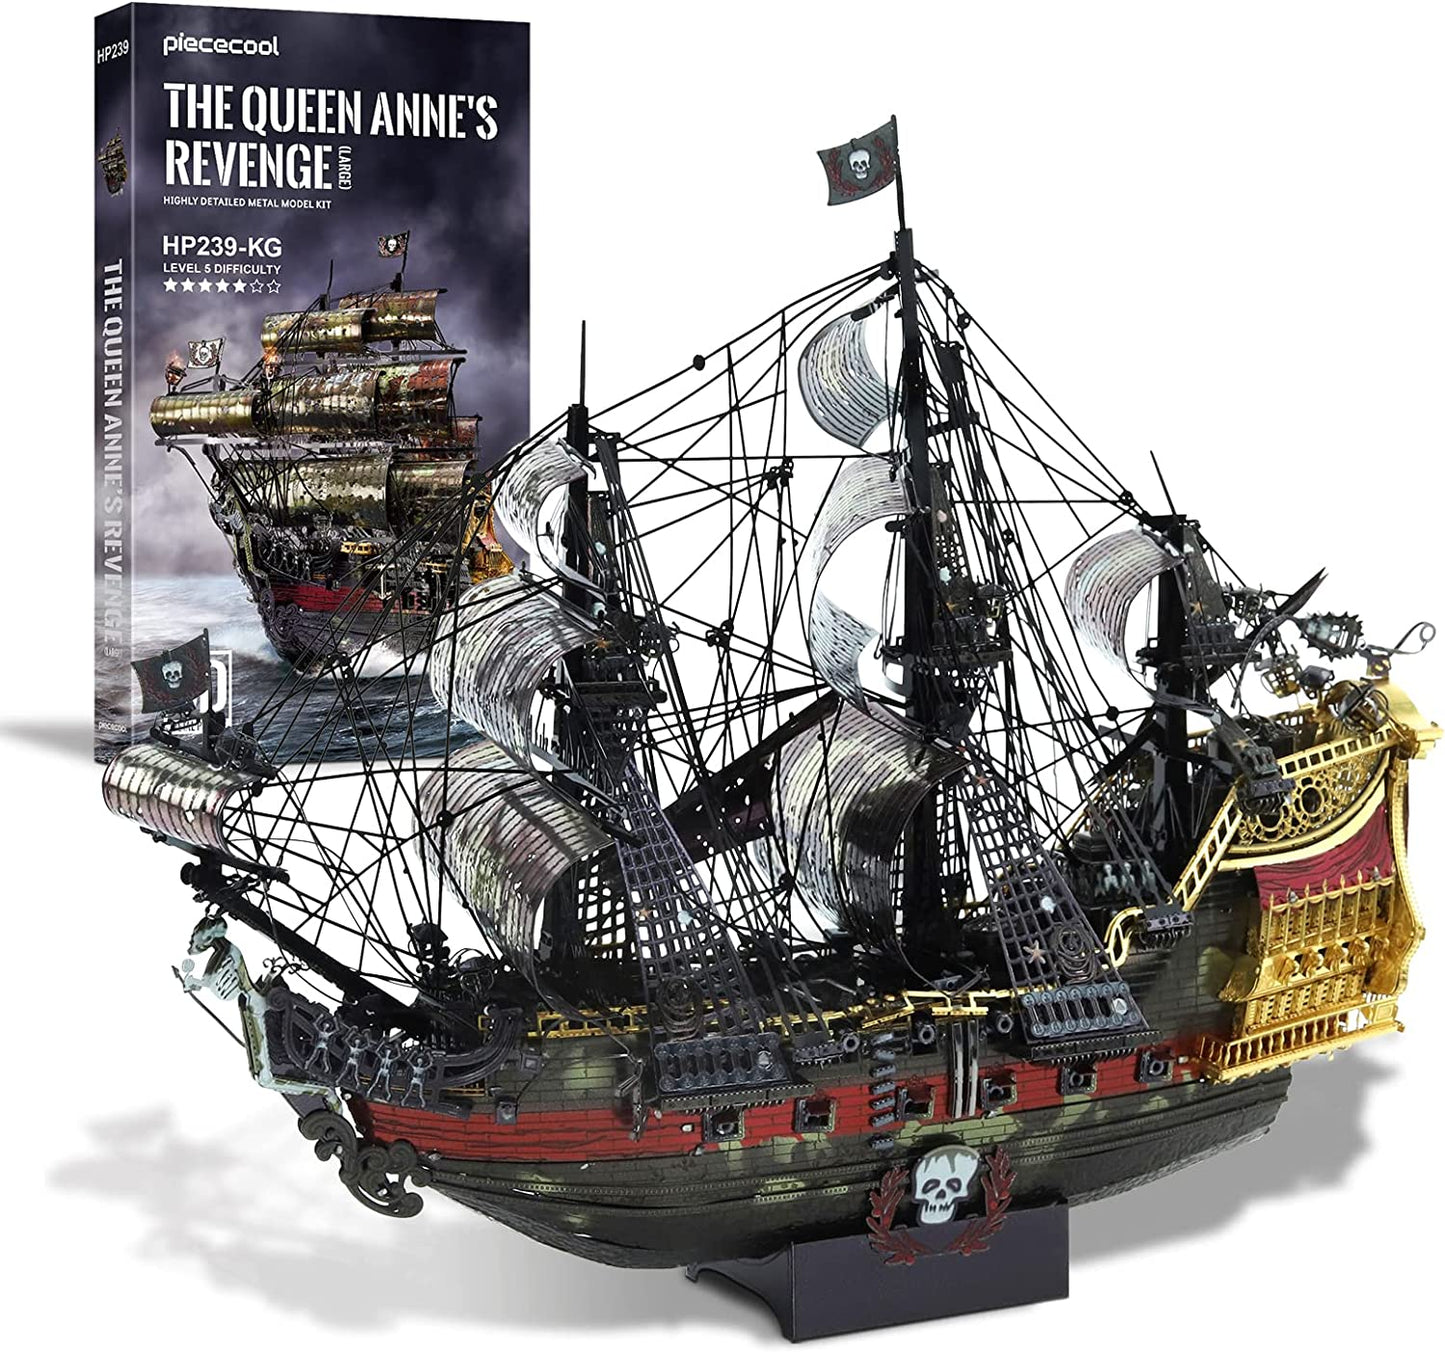 Piececool The Queen Anne's Revenge Pirate Ship Model Kits